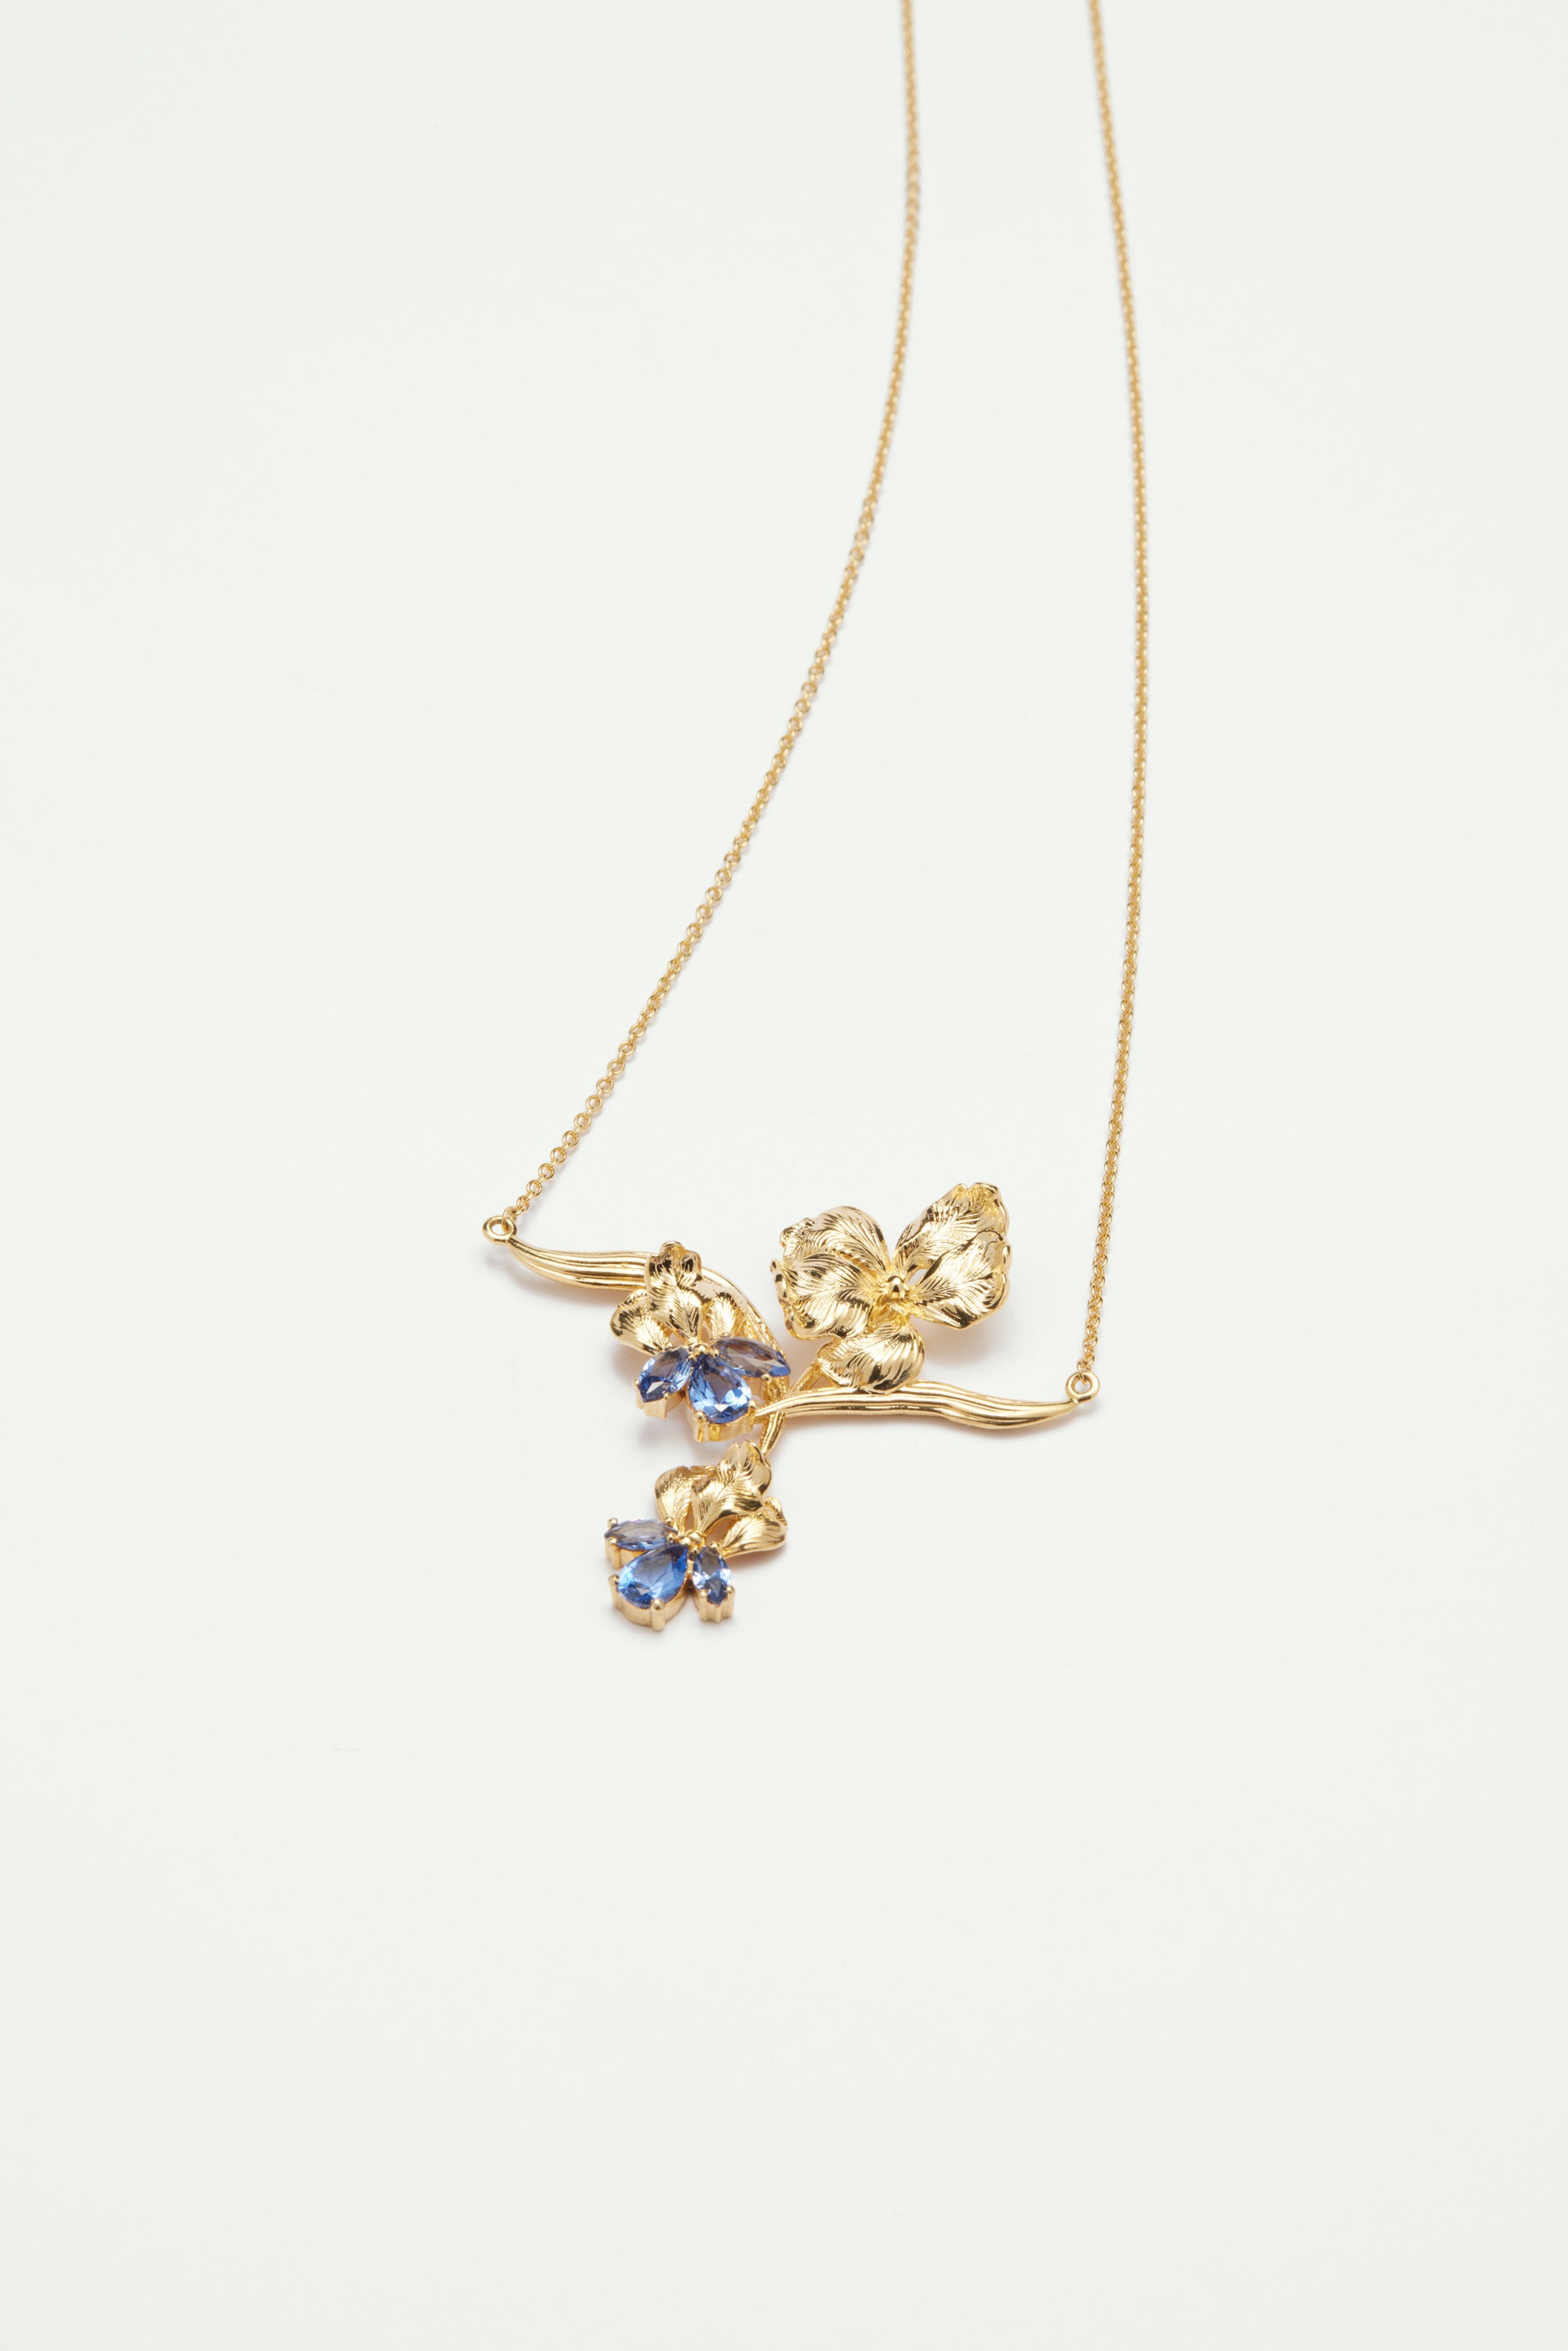 Gold iris and blue crystal statement necklace